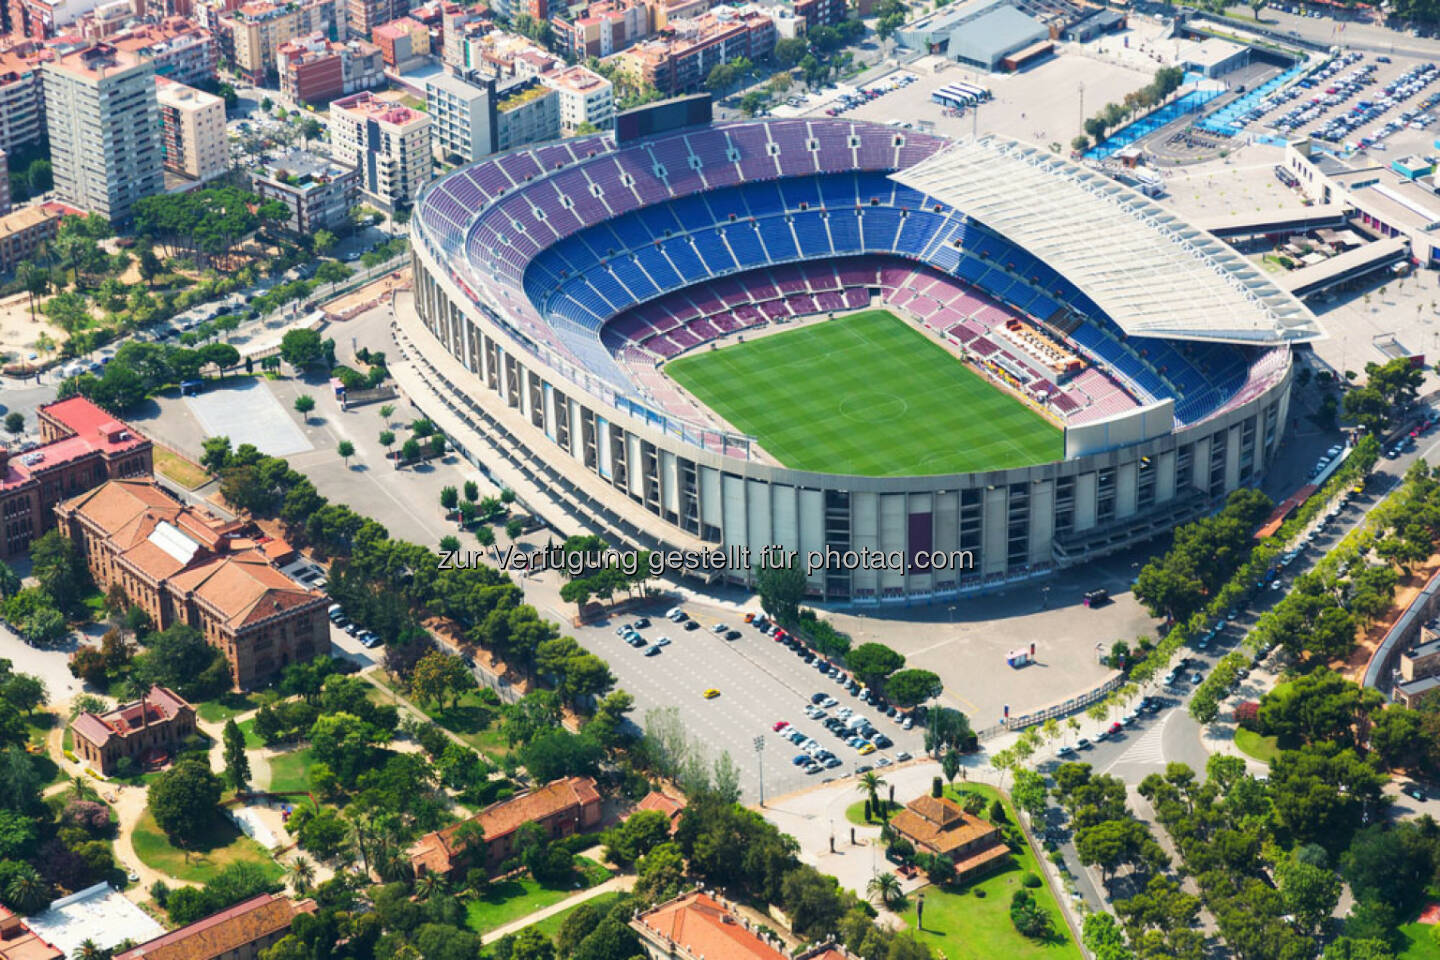 Camp Nou, Stadion, Fussball, FC Barcelona, http://www.shutterstock.com/de/pic-221573320/stock-photo-the-largest-stadium-of-barcelona-from-helicopter-spain.html